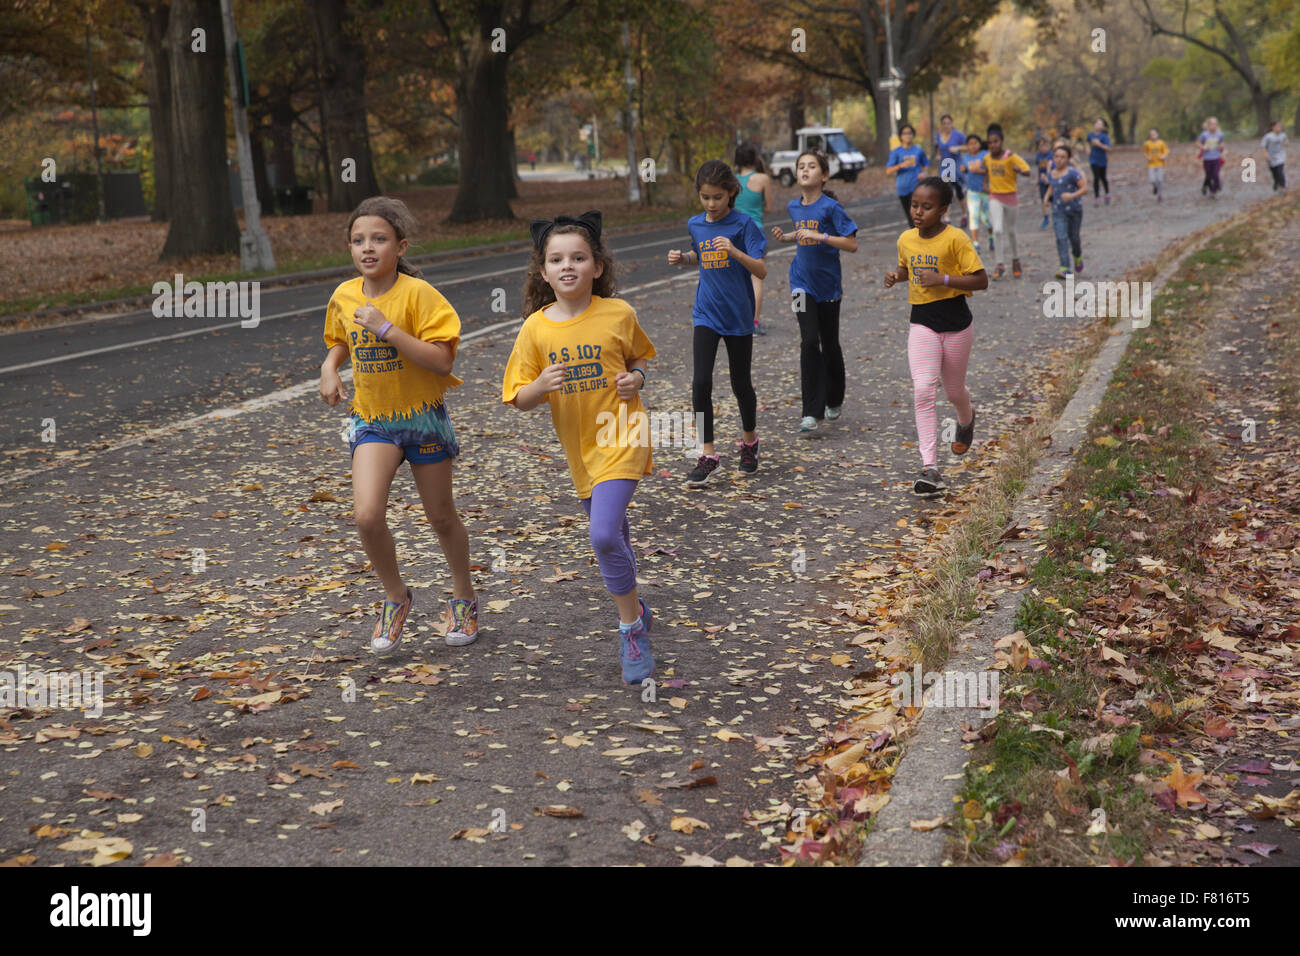 Local elementary school children jogging together on the road in Prospect Park, Brooklyn, New York. Stock Photo